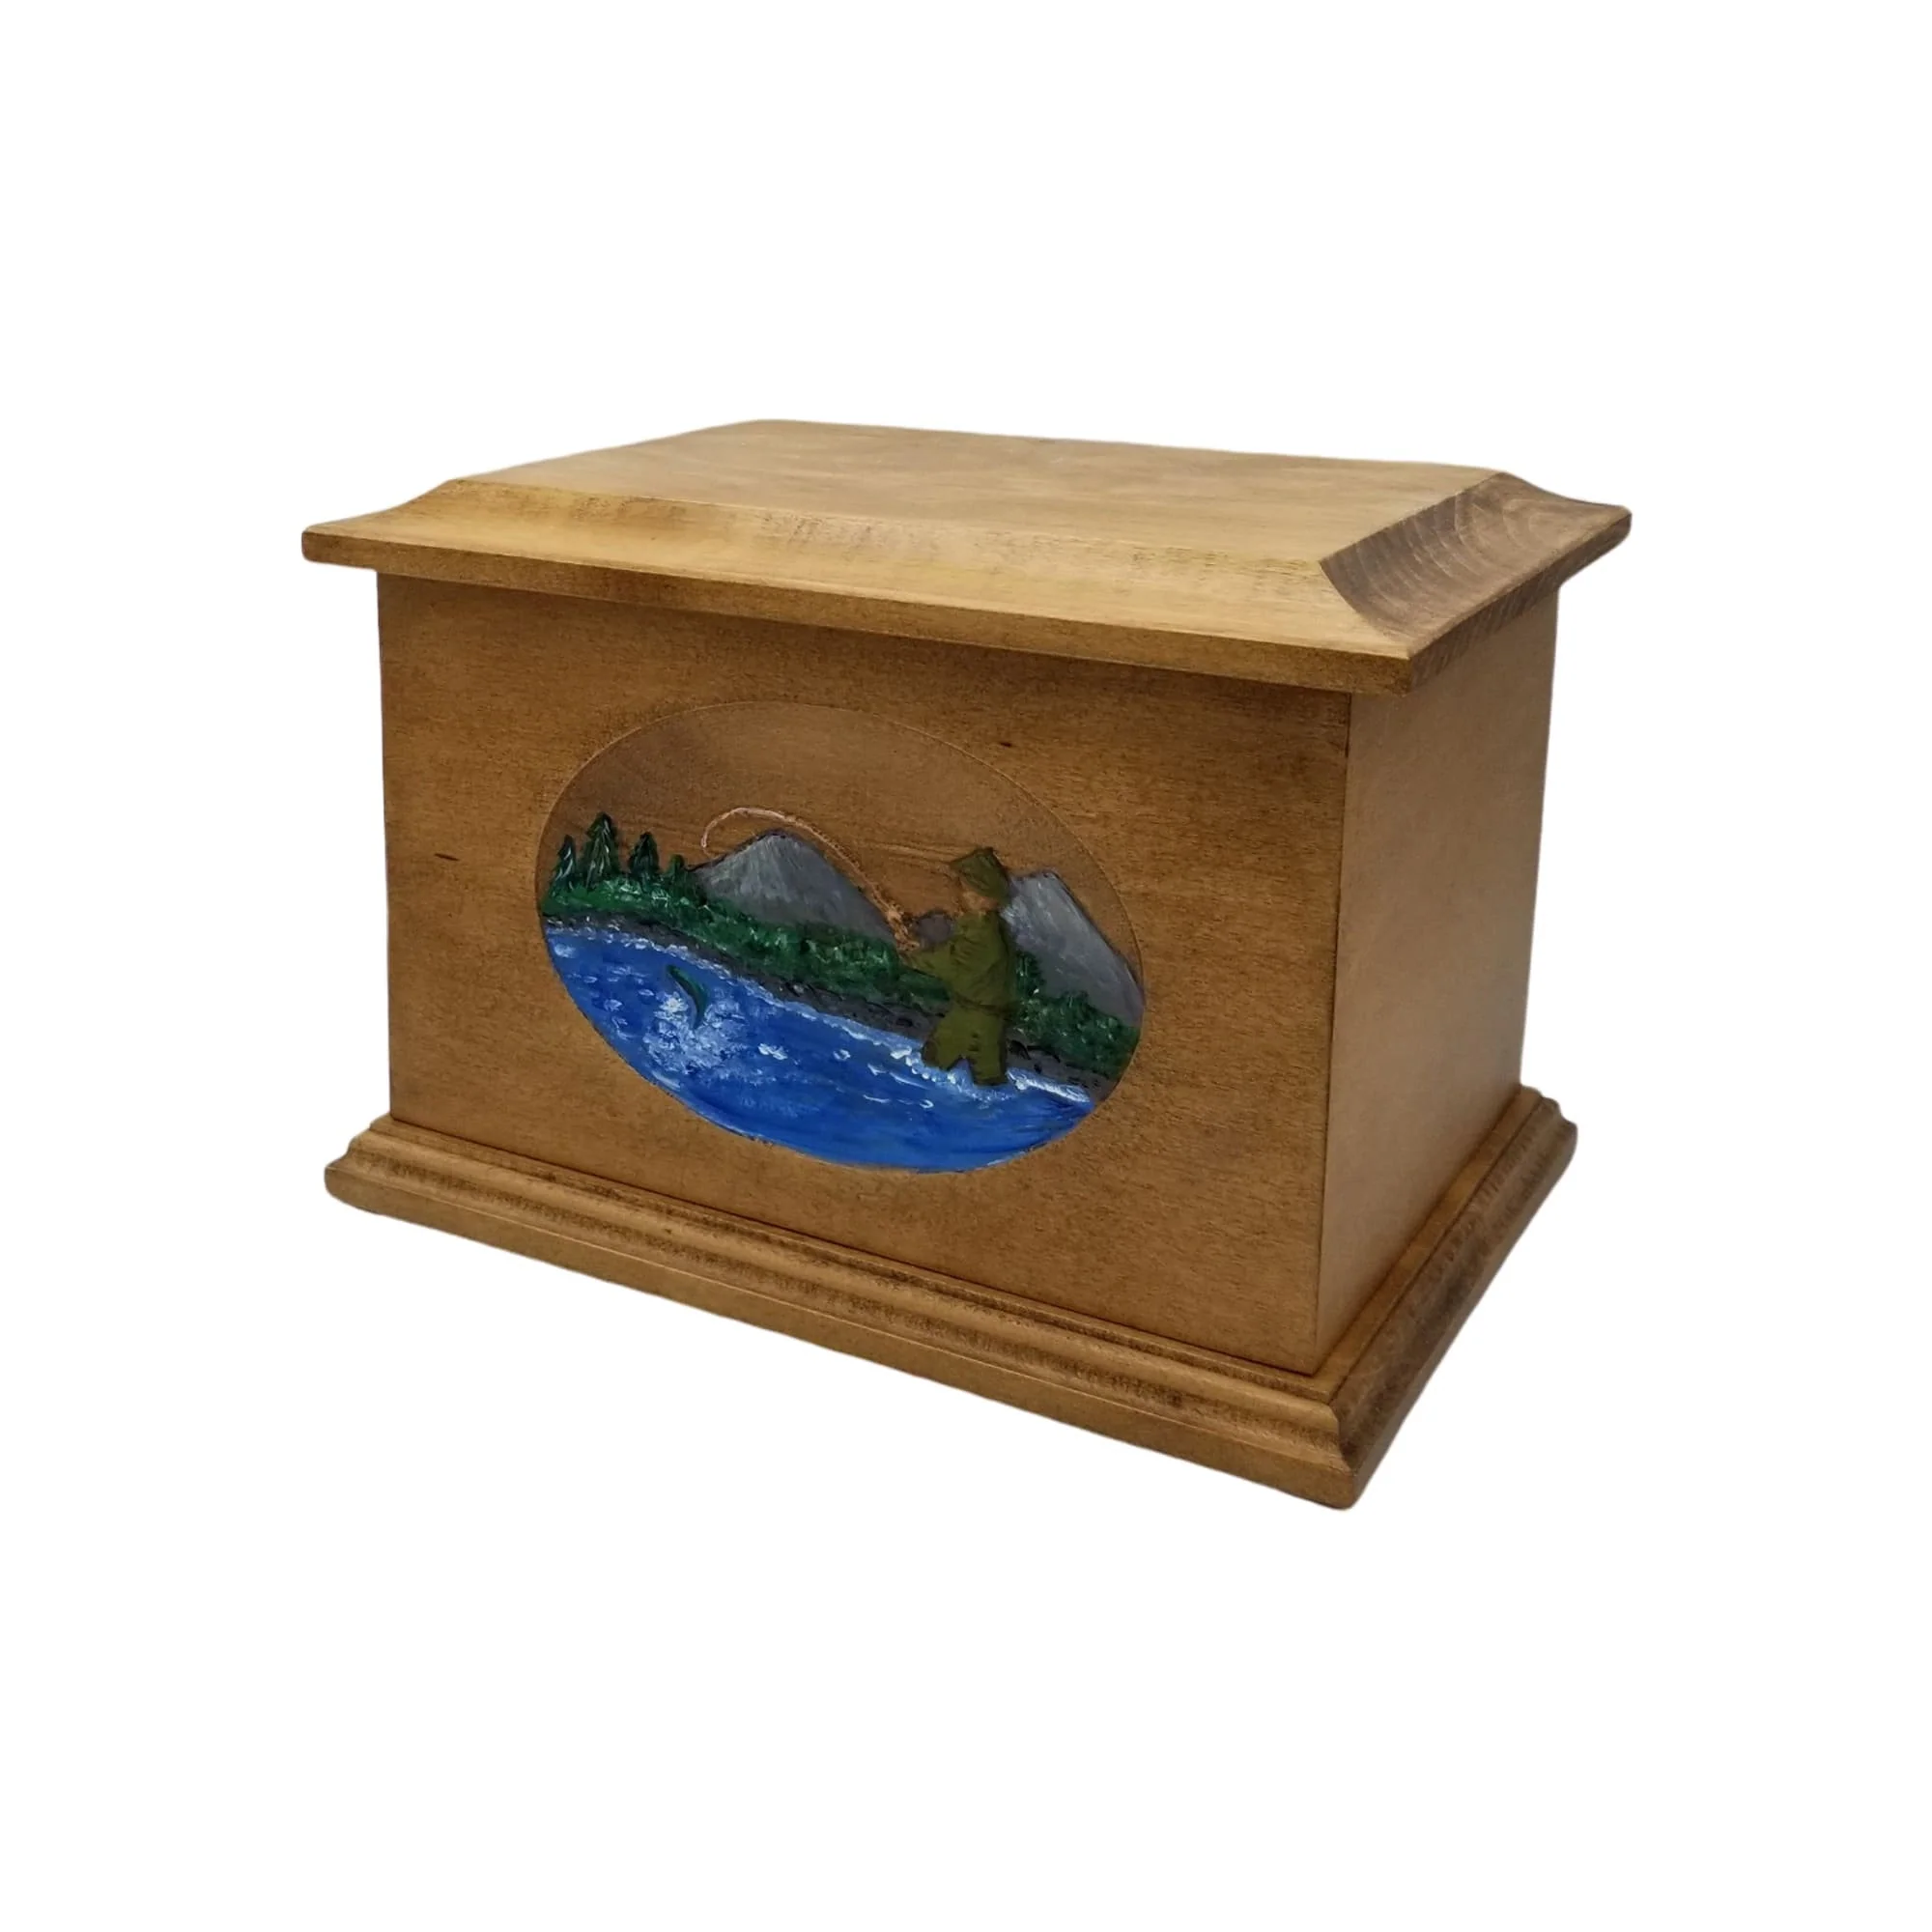 Maple Fisherman Scene Urn with a Huguenot Satin Finish Painted